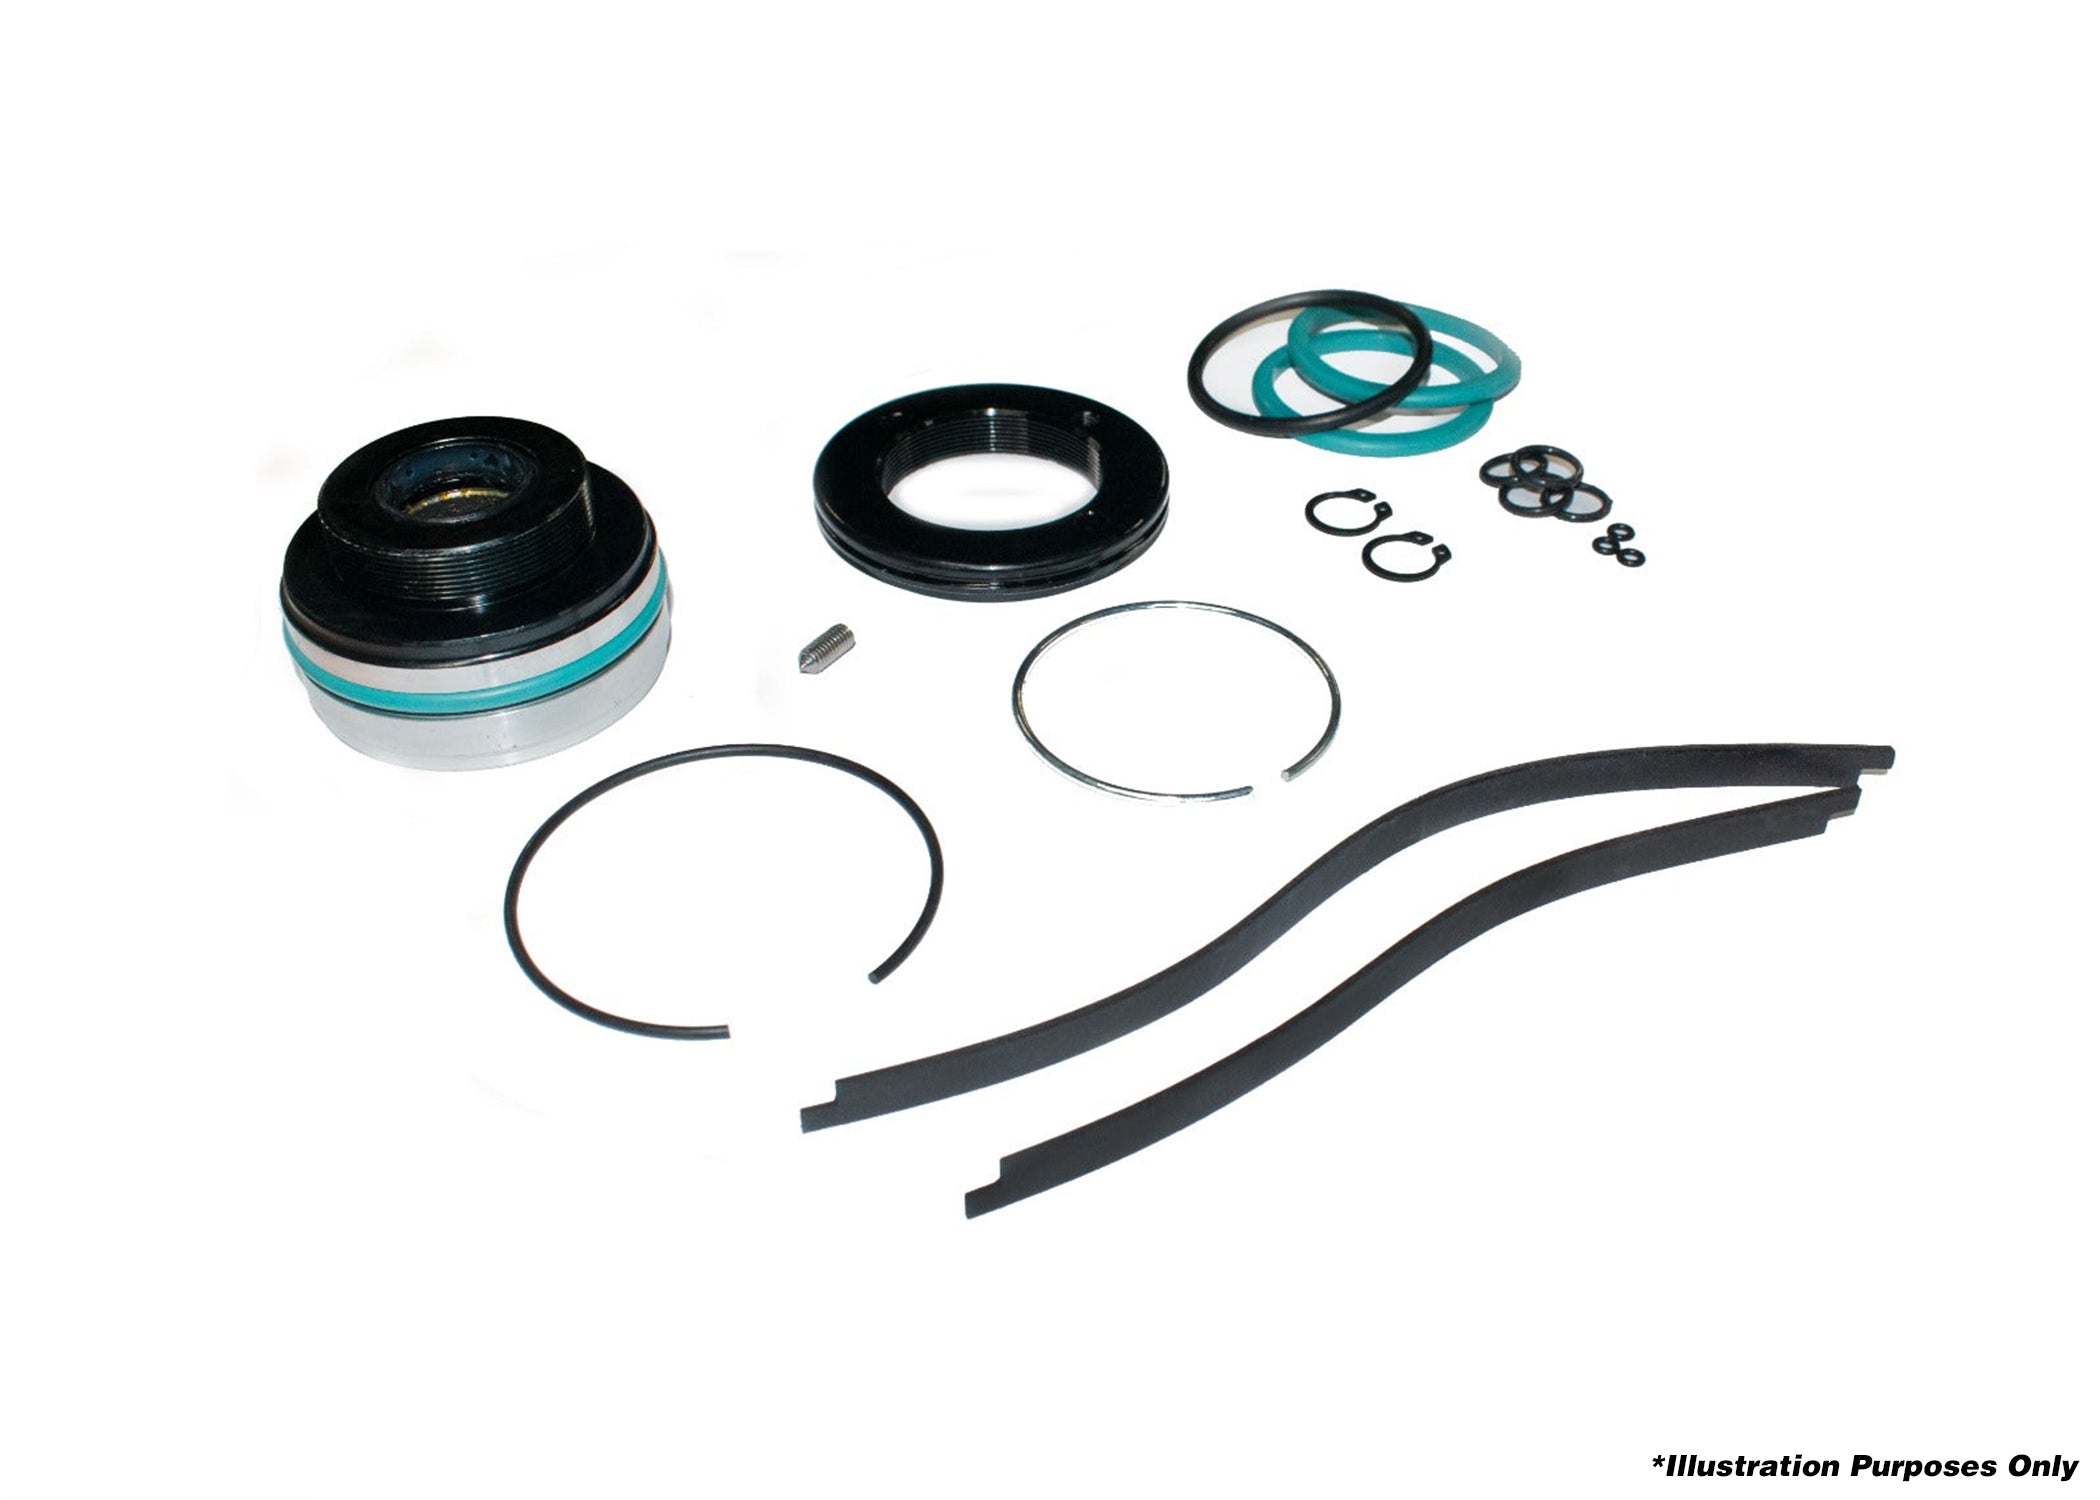 DOBINSONS REBUILD KIT FOR MRA WITH 56mm BODY AND 22mm ROD - MRRK50-003